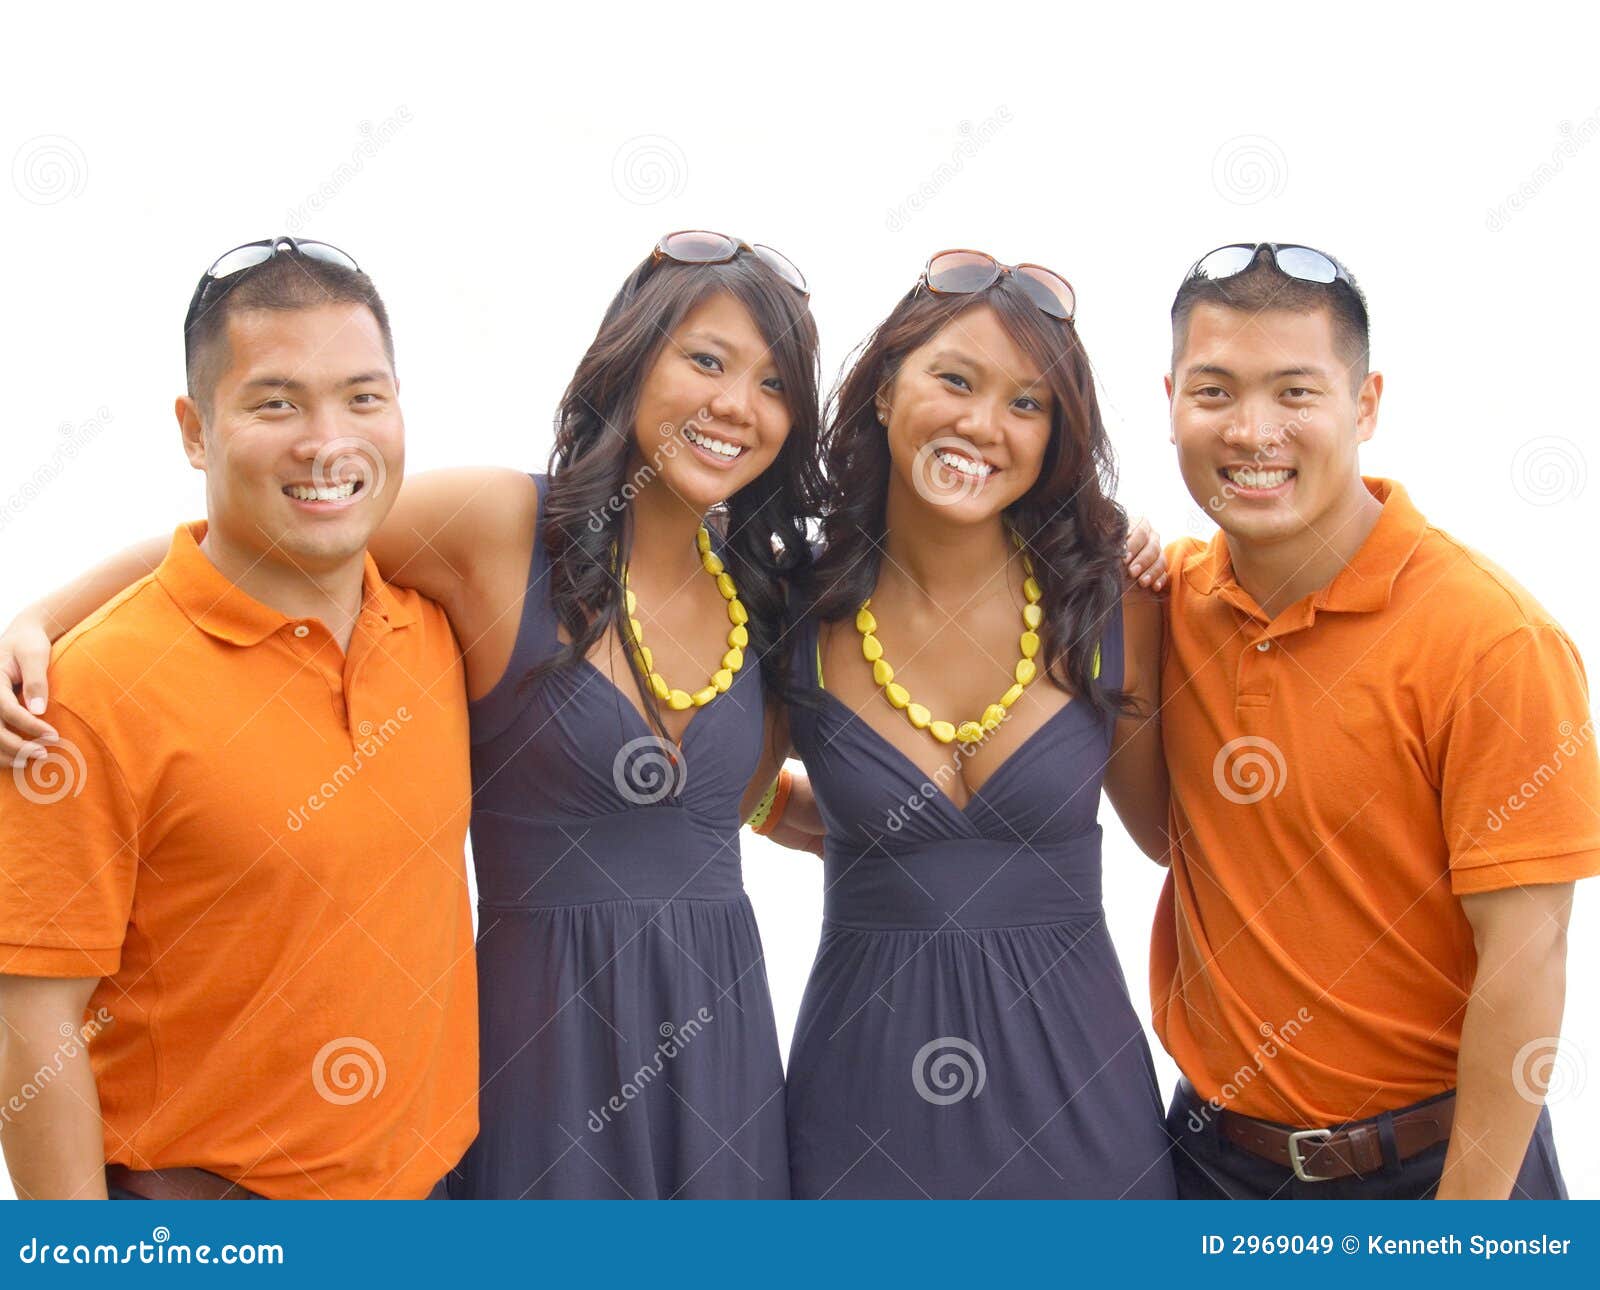 Guys and gals stock image photo